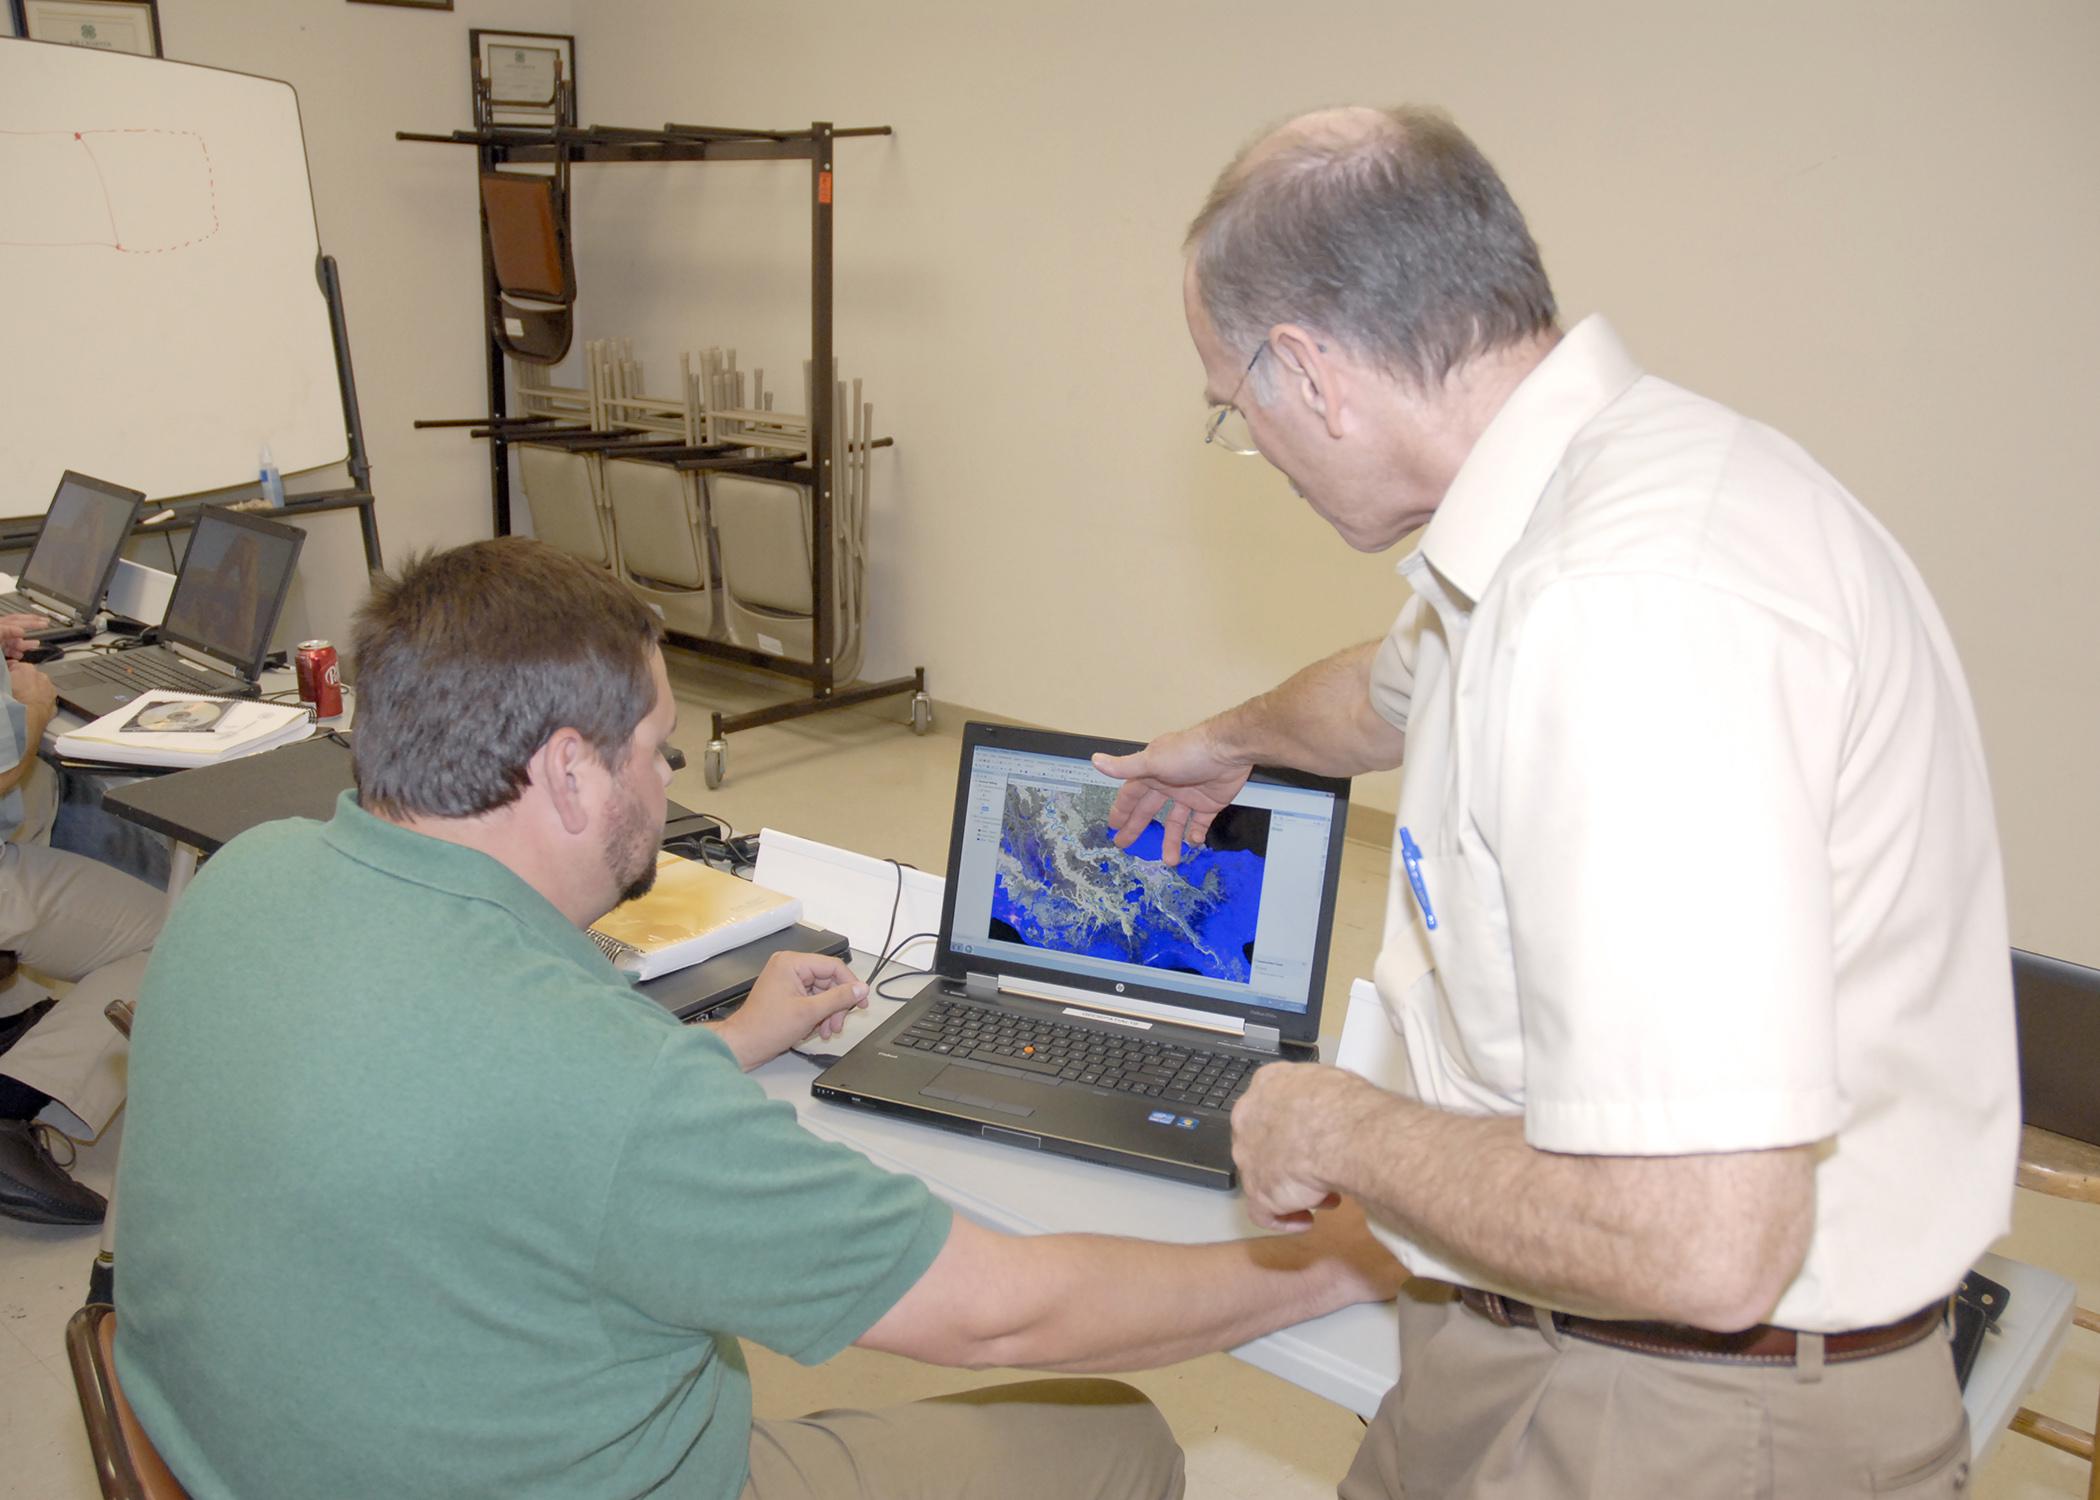 Jim Davis of Olive Branch, left, with the Mississippi Department of Transportation, learns how to use new software from Scott Samson, professor with the Extension Service and the Geosystems Research Institute at Mississippi State University, during a class in Hernando on Oct. 17, 2012. (Photo by MSU Ag Communications/Linda Breazeale)